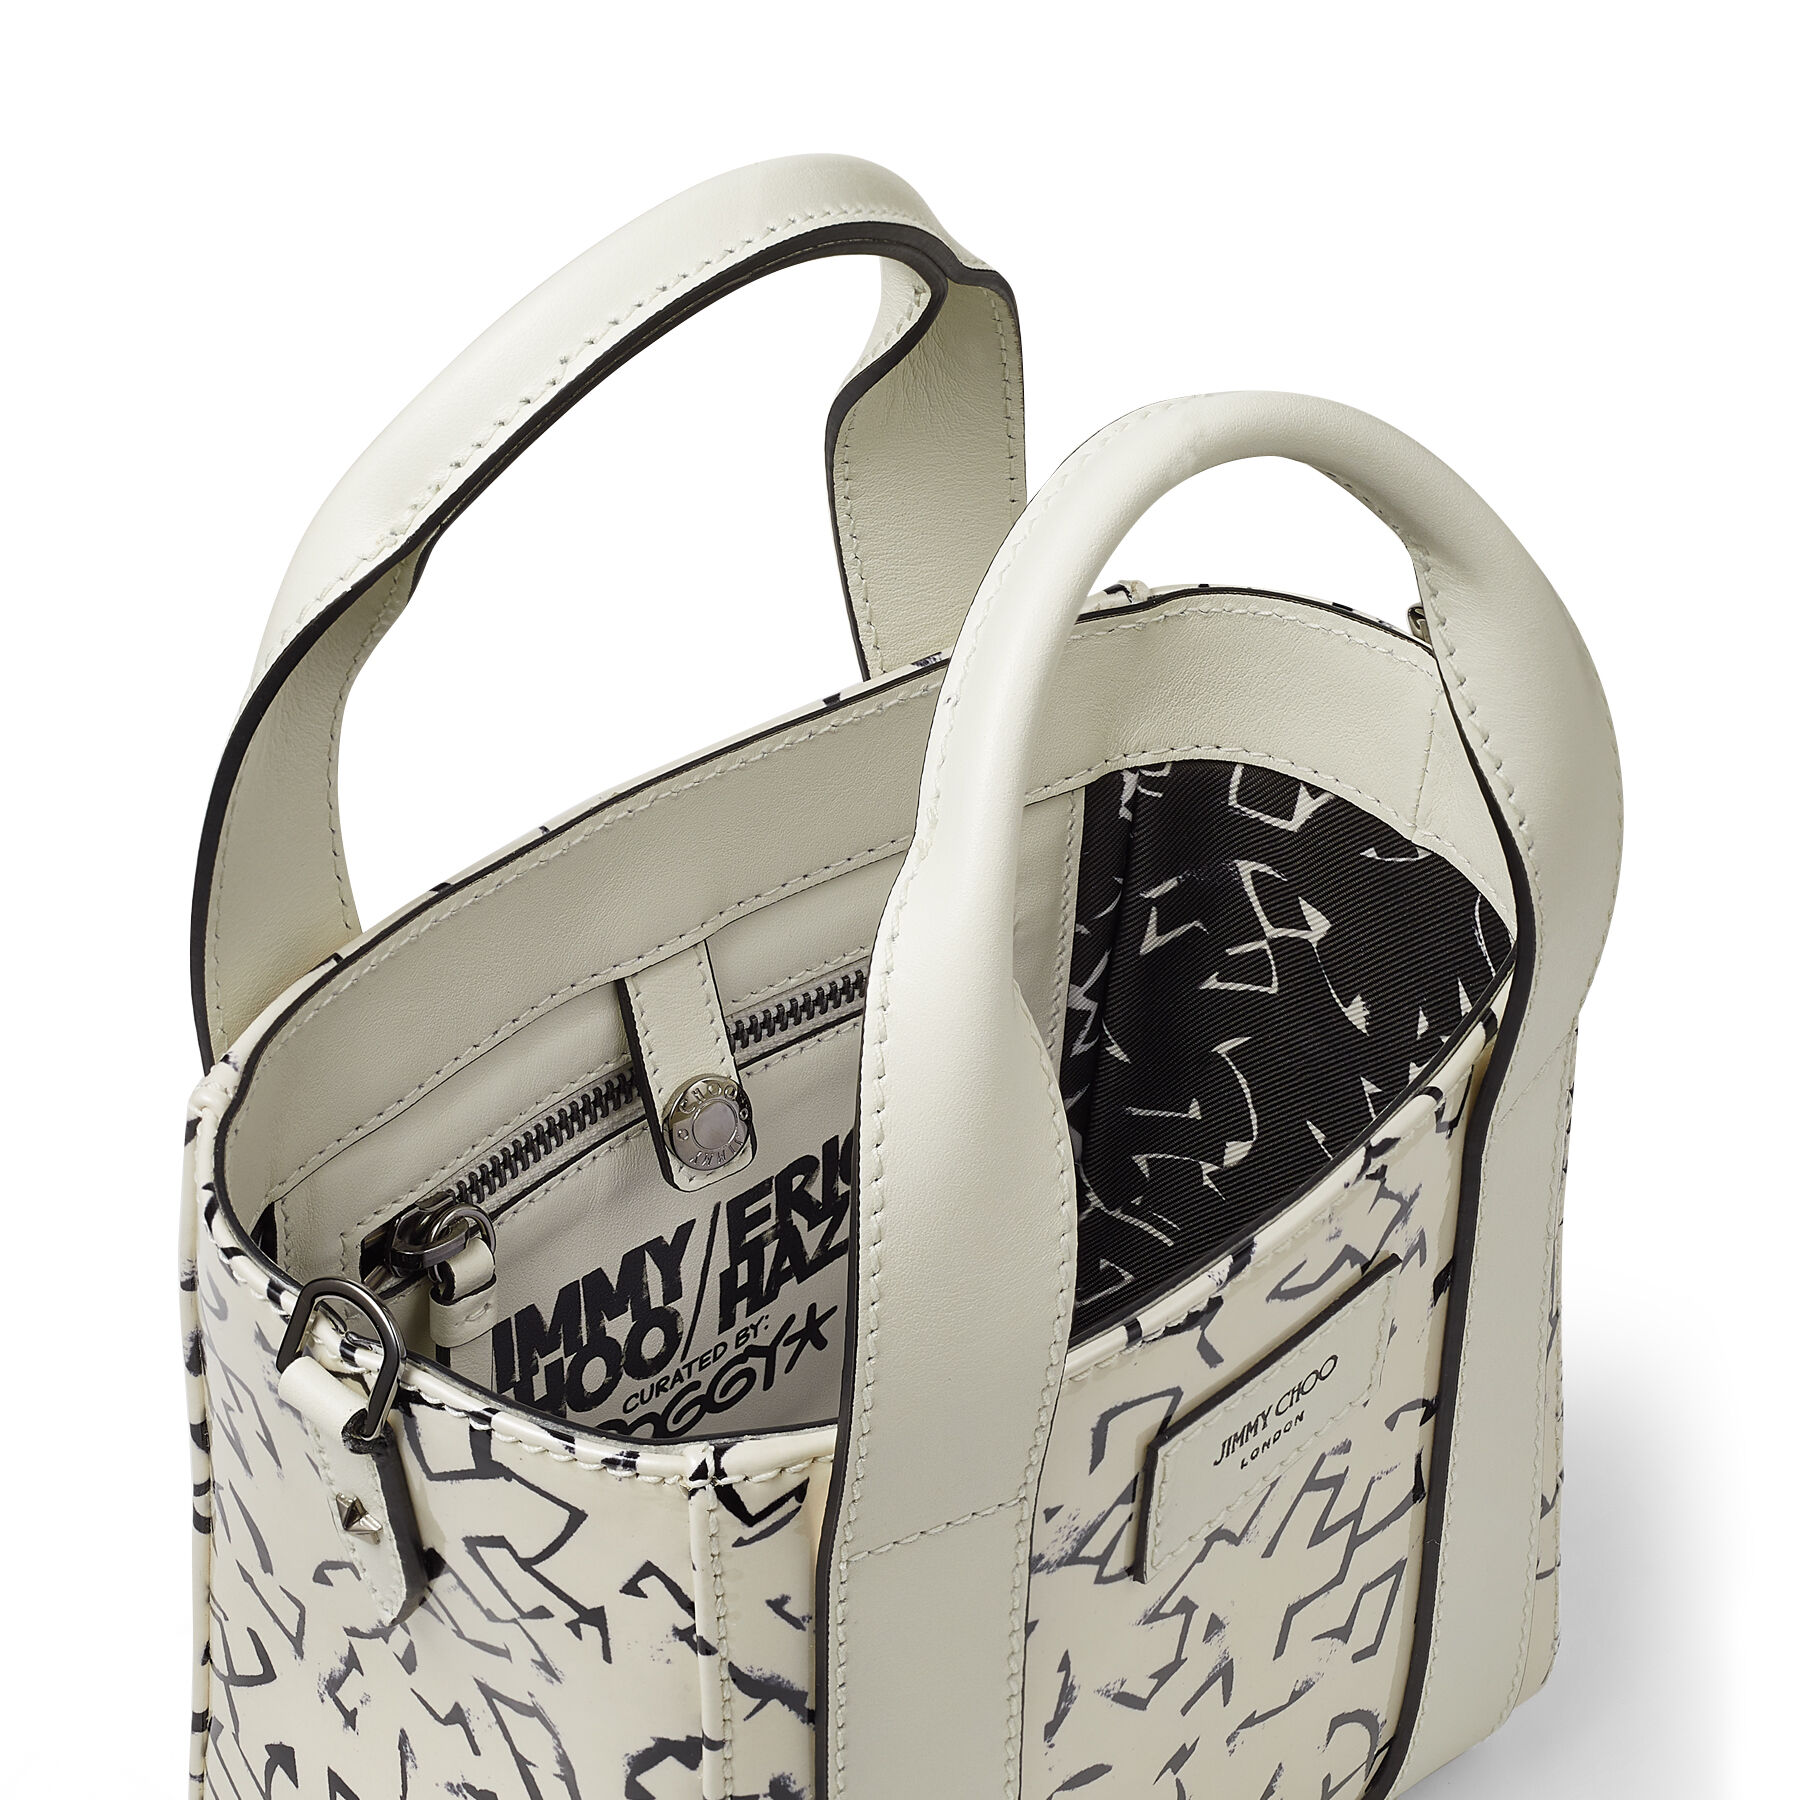 White and Black Artwork Printed Patent Leather Tote Bag | SHOPPER 